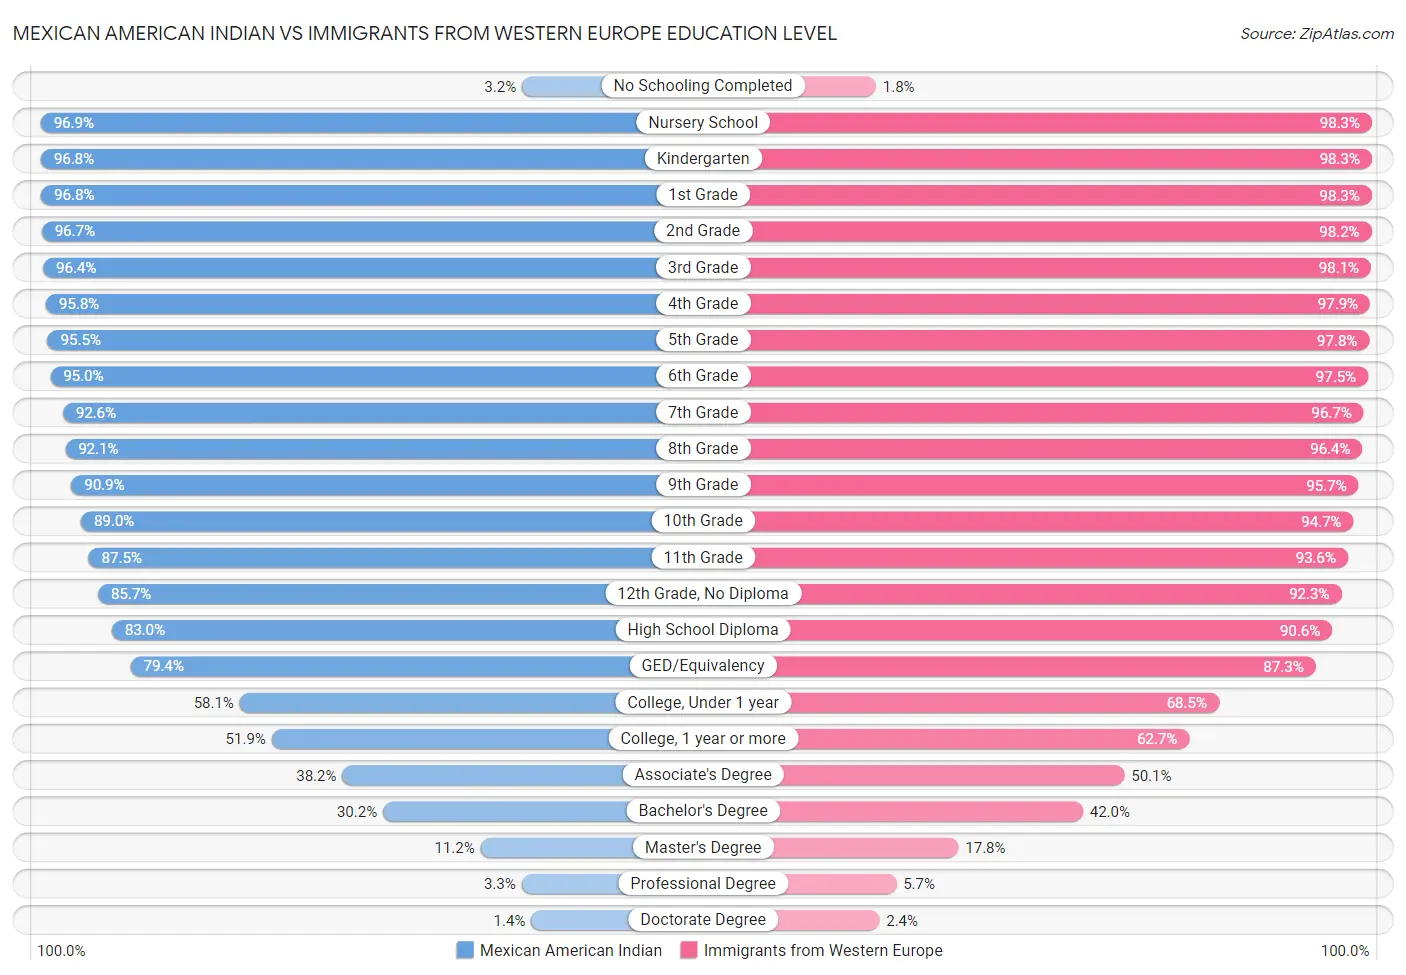 Mexican American Indian vs Immigrants from Western Europe Education Level